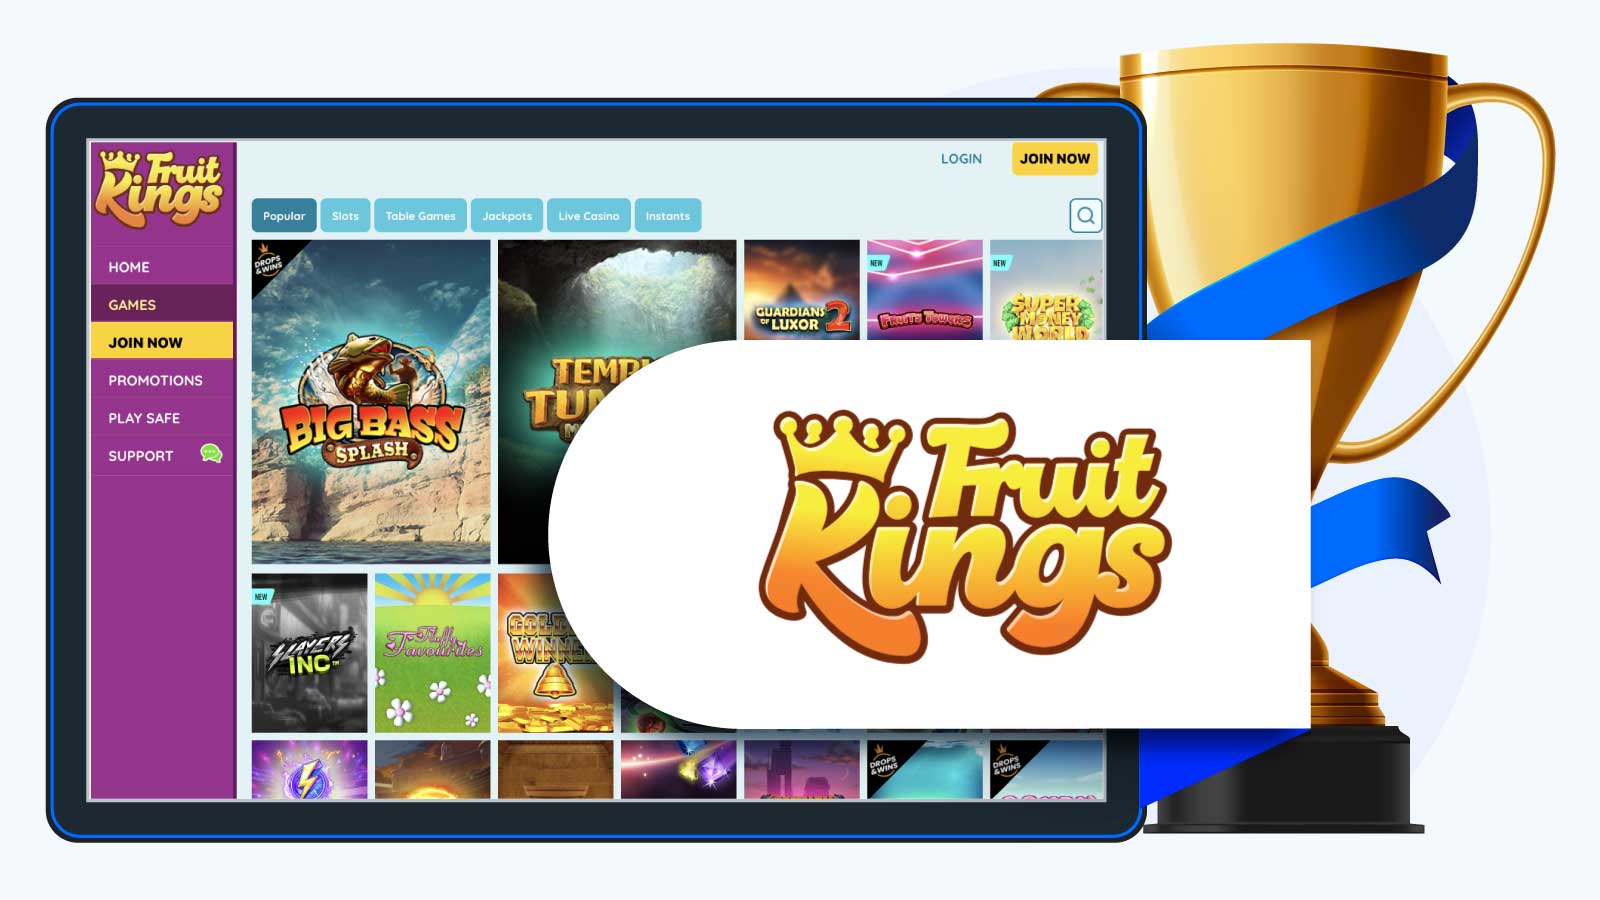 #1. Best Independent Casino - Fruit Kings